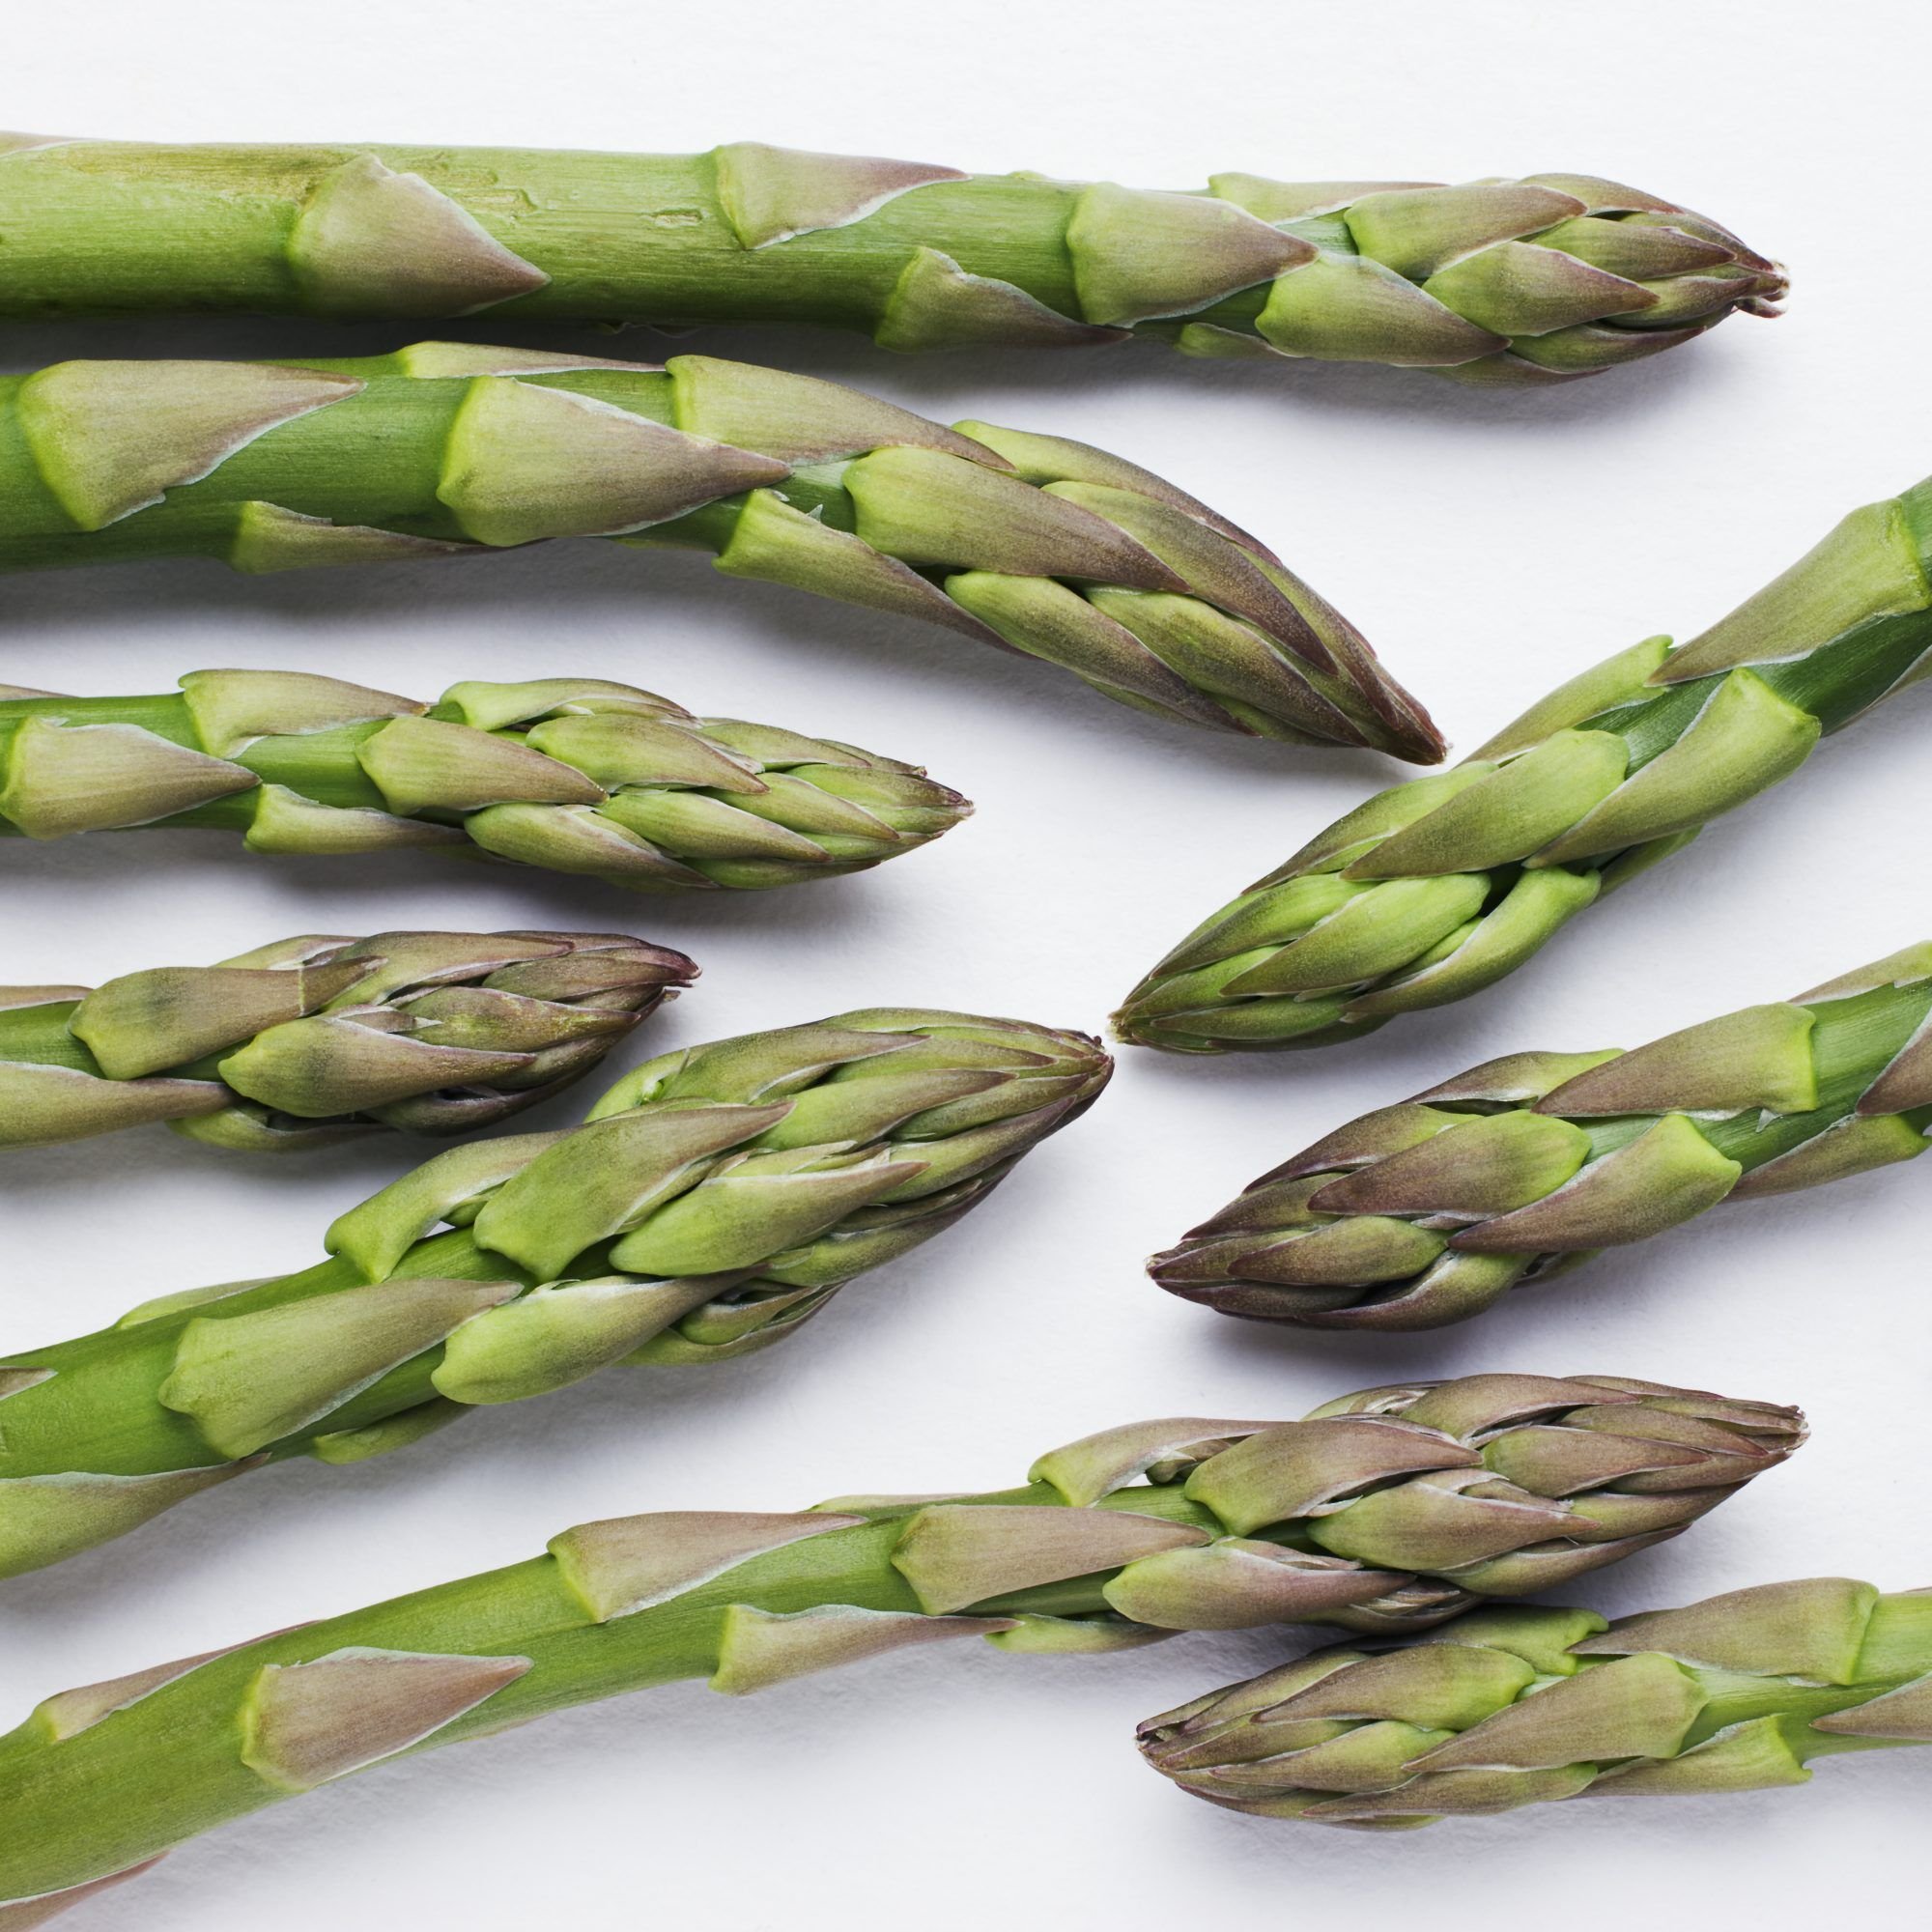 10 Health Benefits of Asparagus, According to Nutritionists